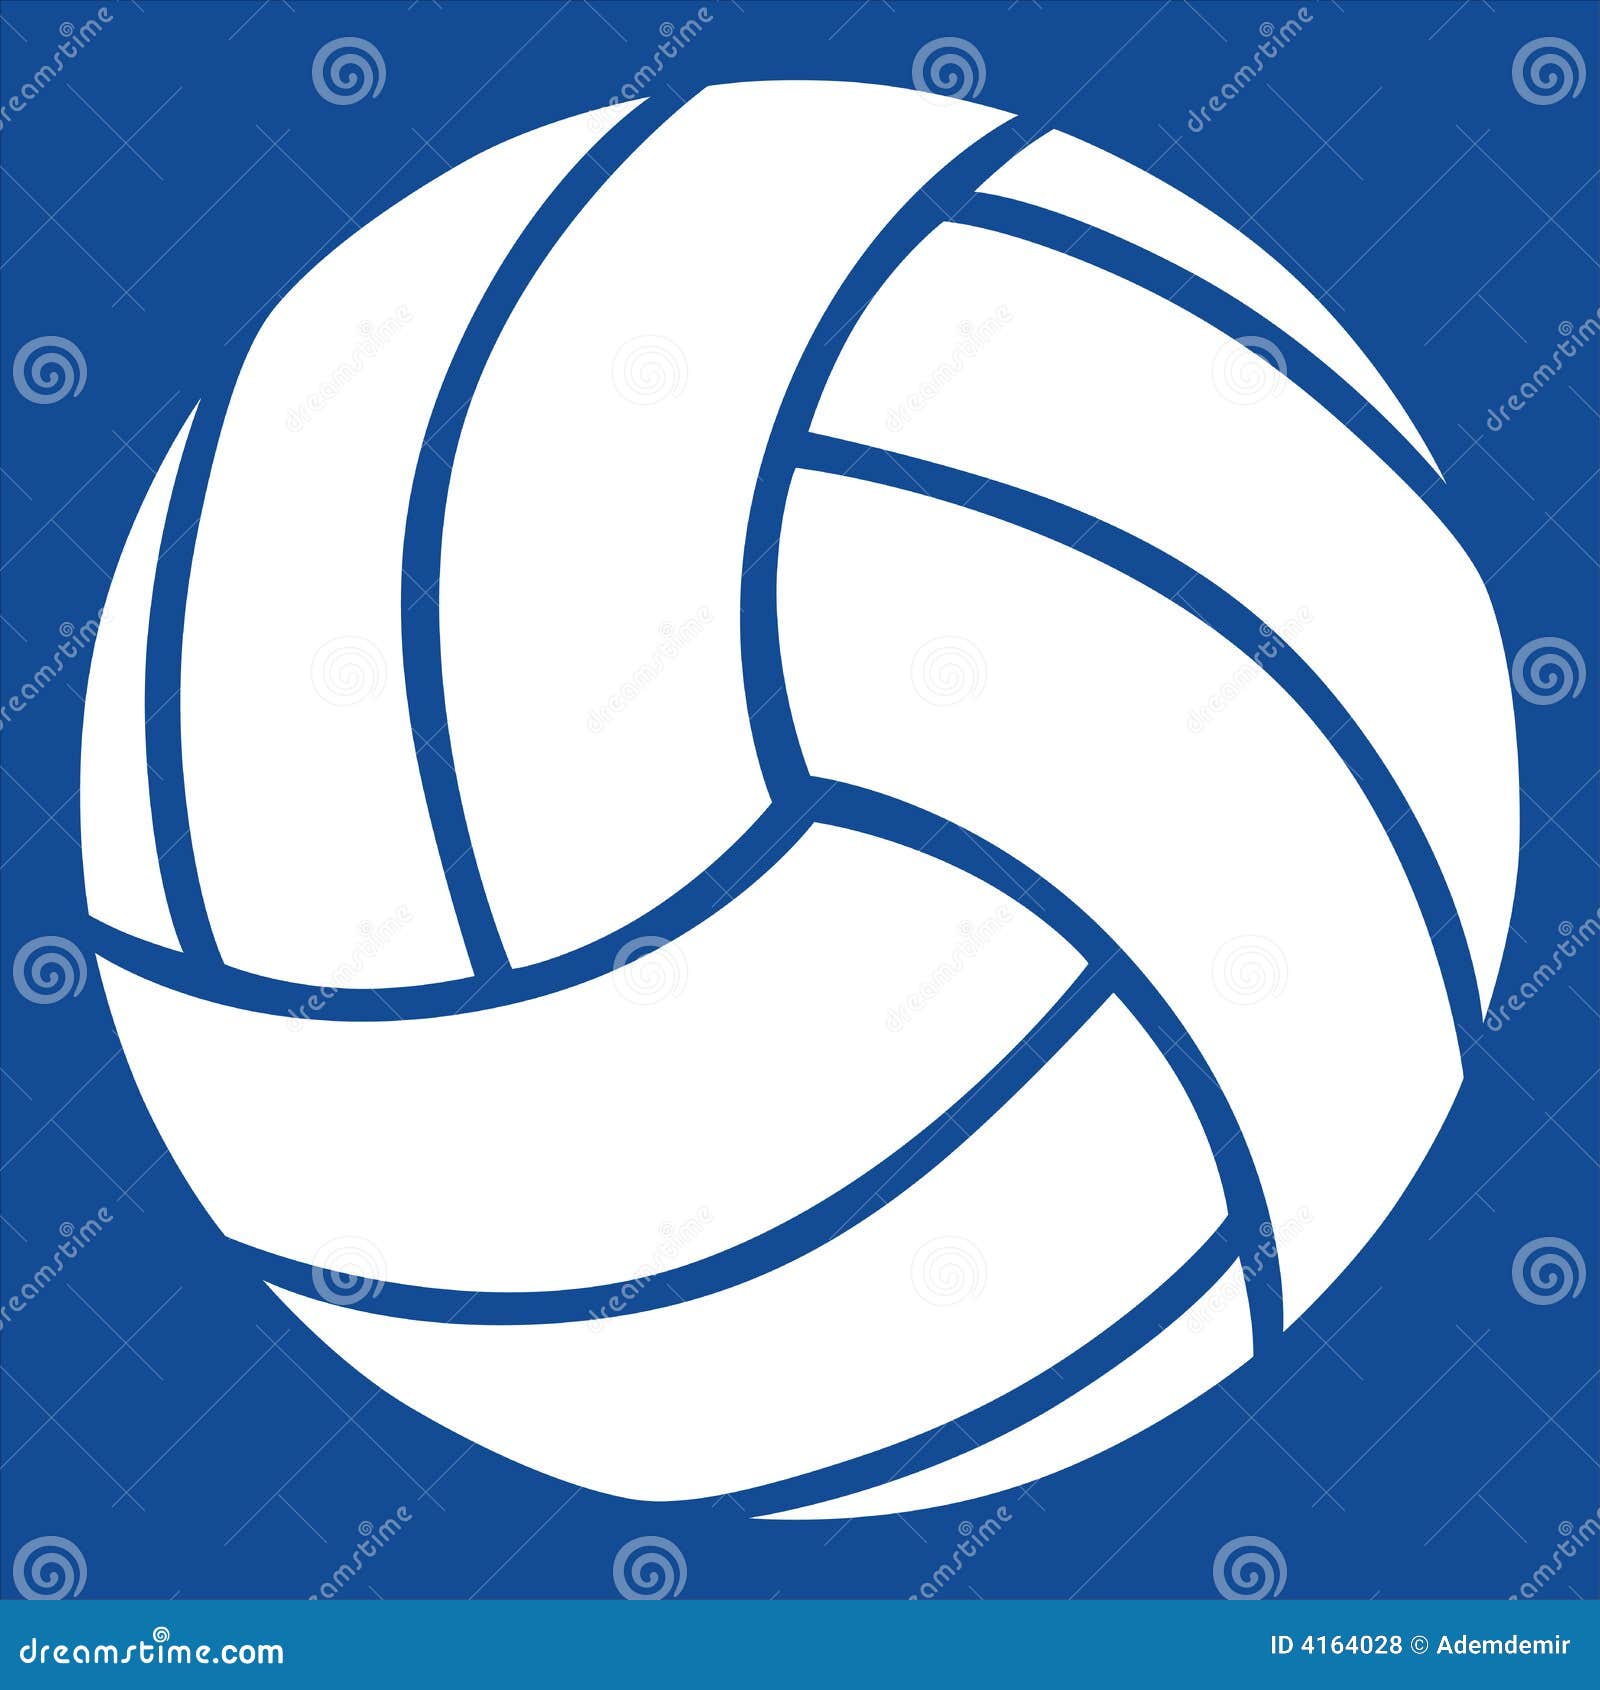 volleyball clipart no background - photo #22